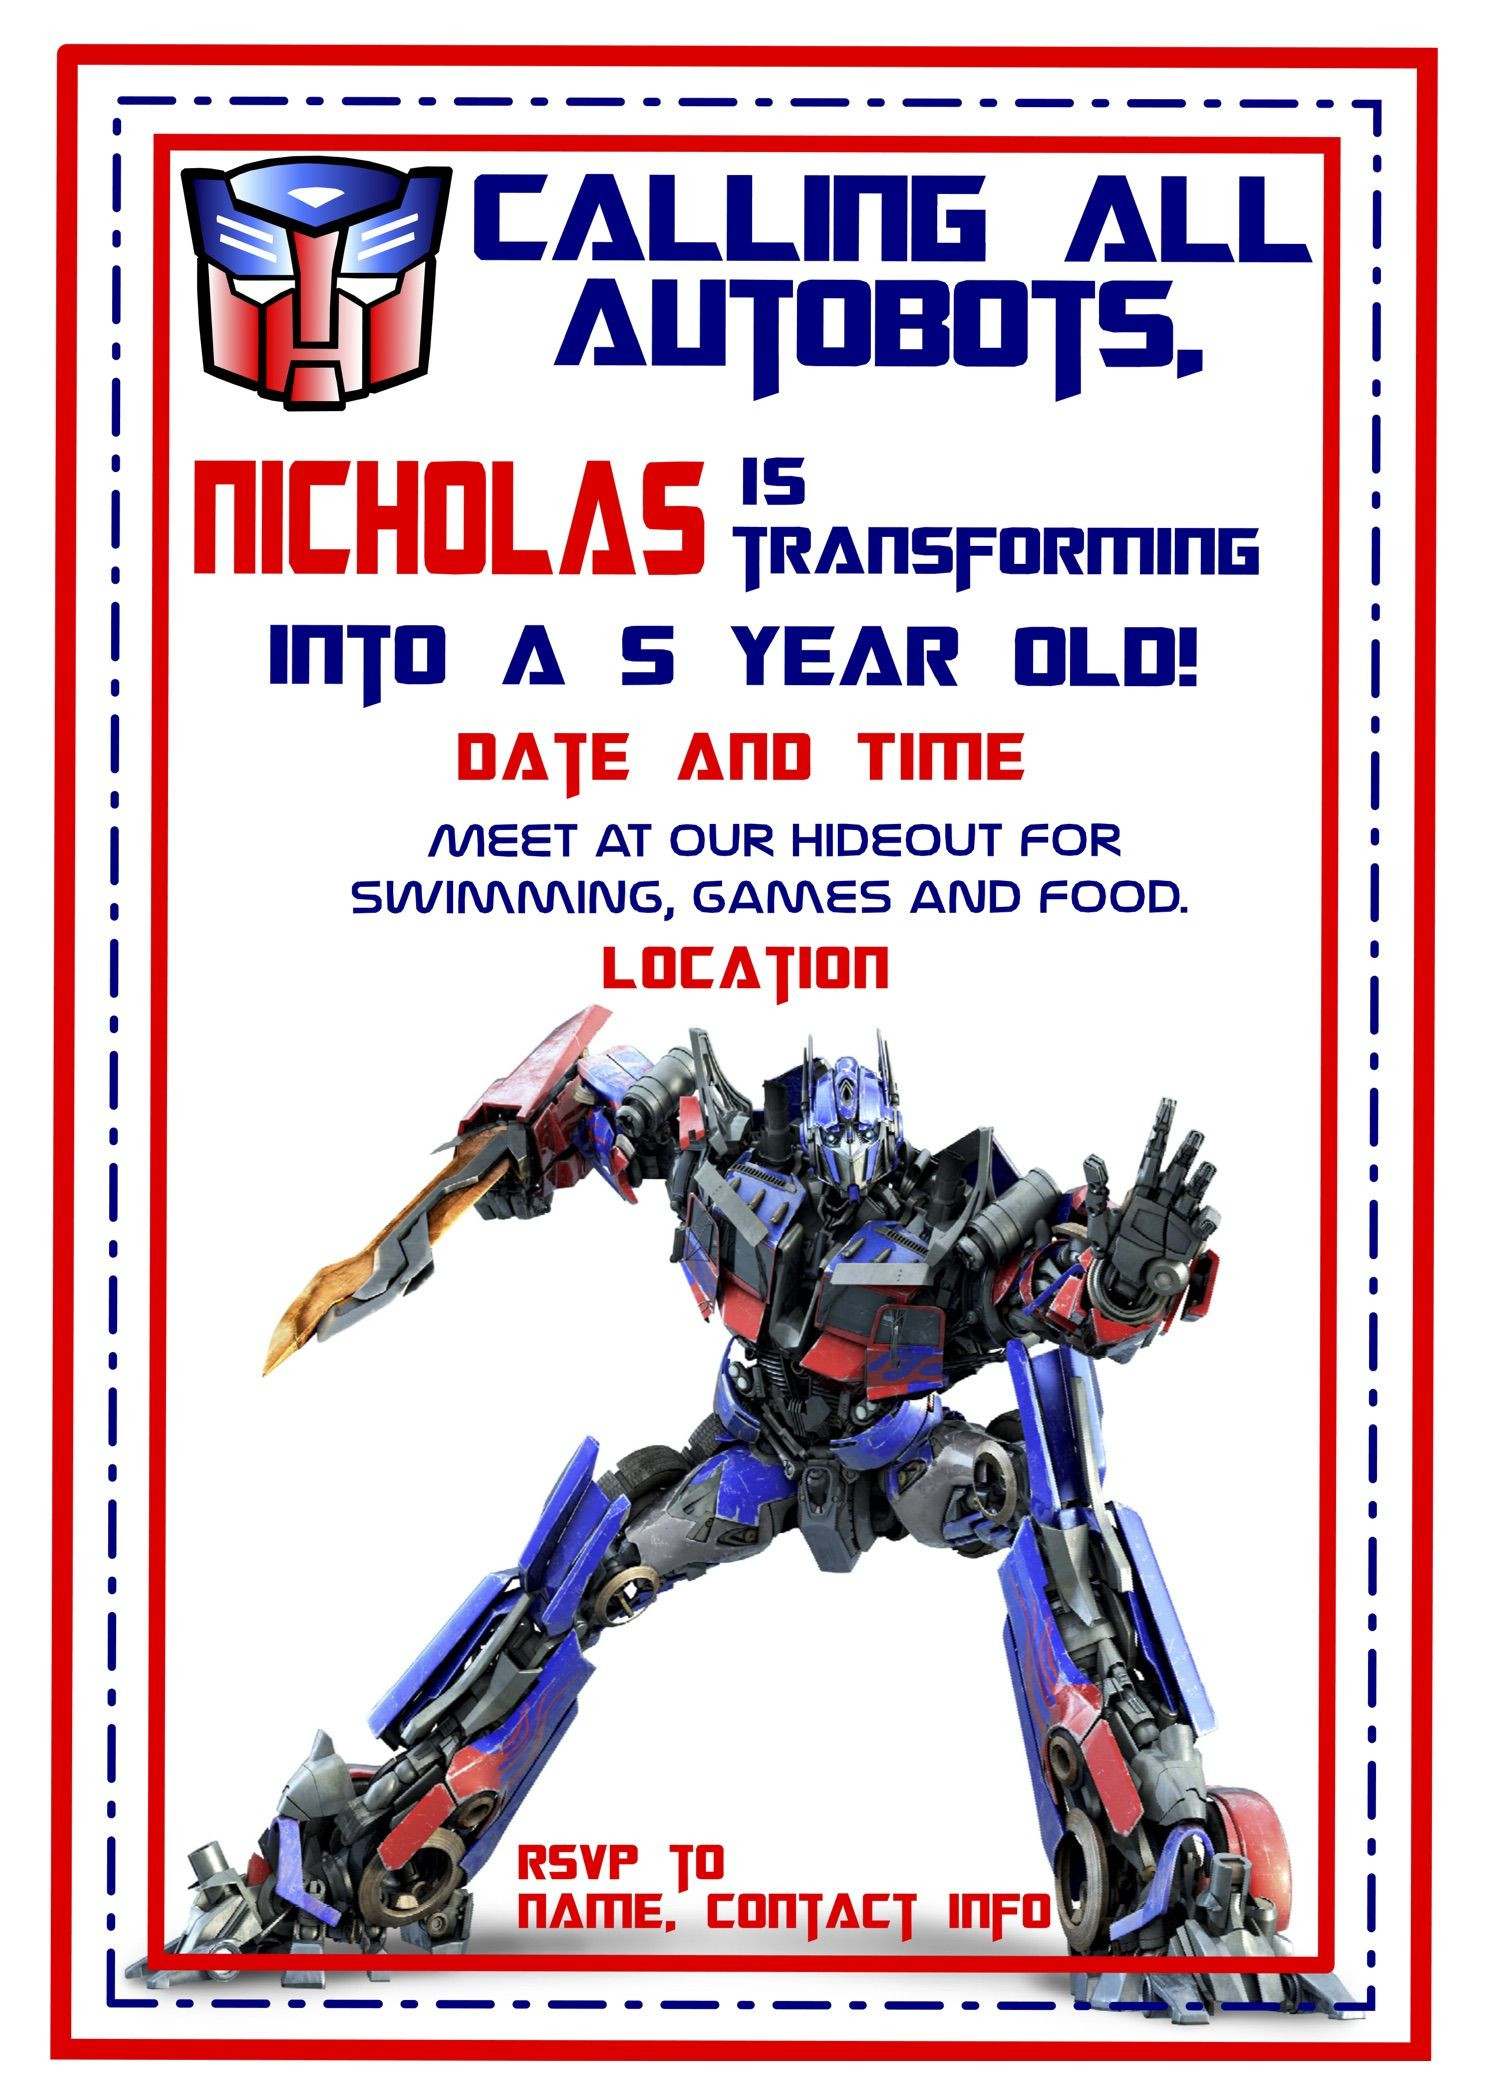 Transformers Birthday Invitations
 Transformers Themed Birthday Party Invite Designed for